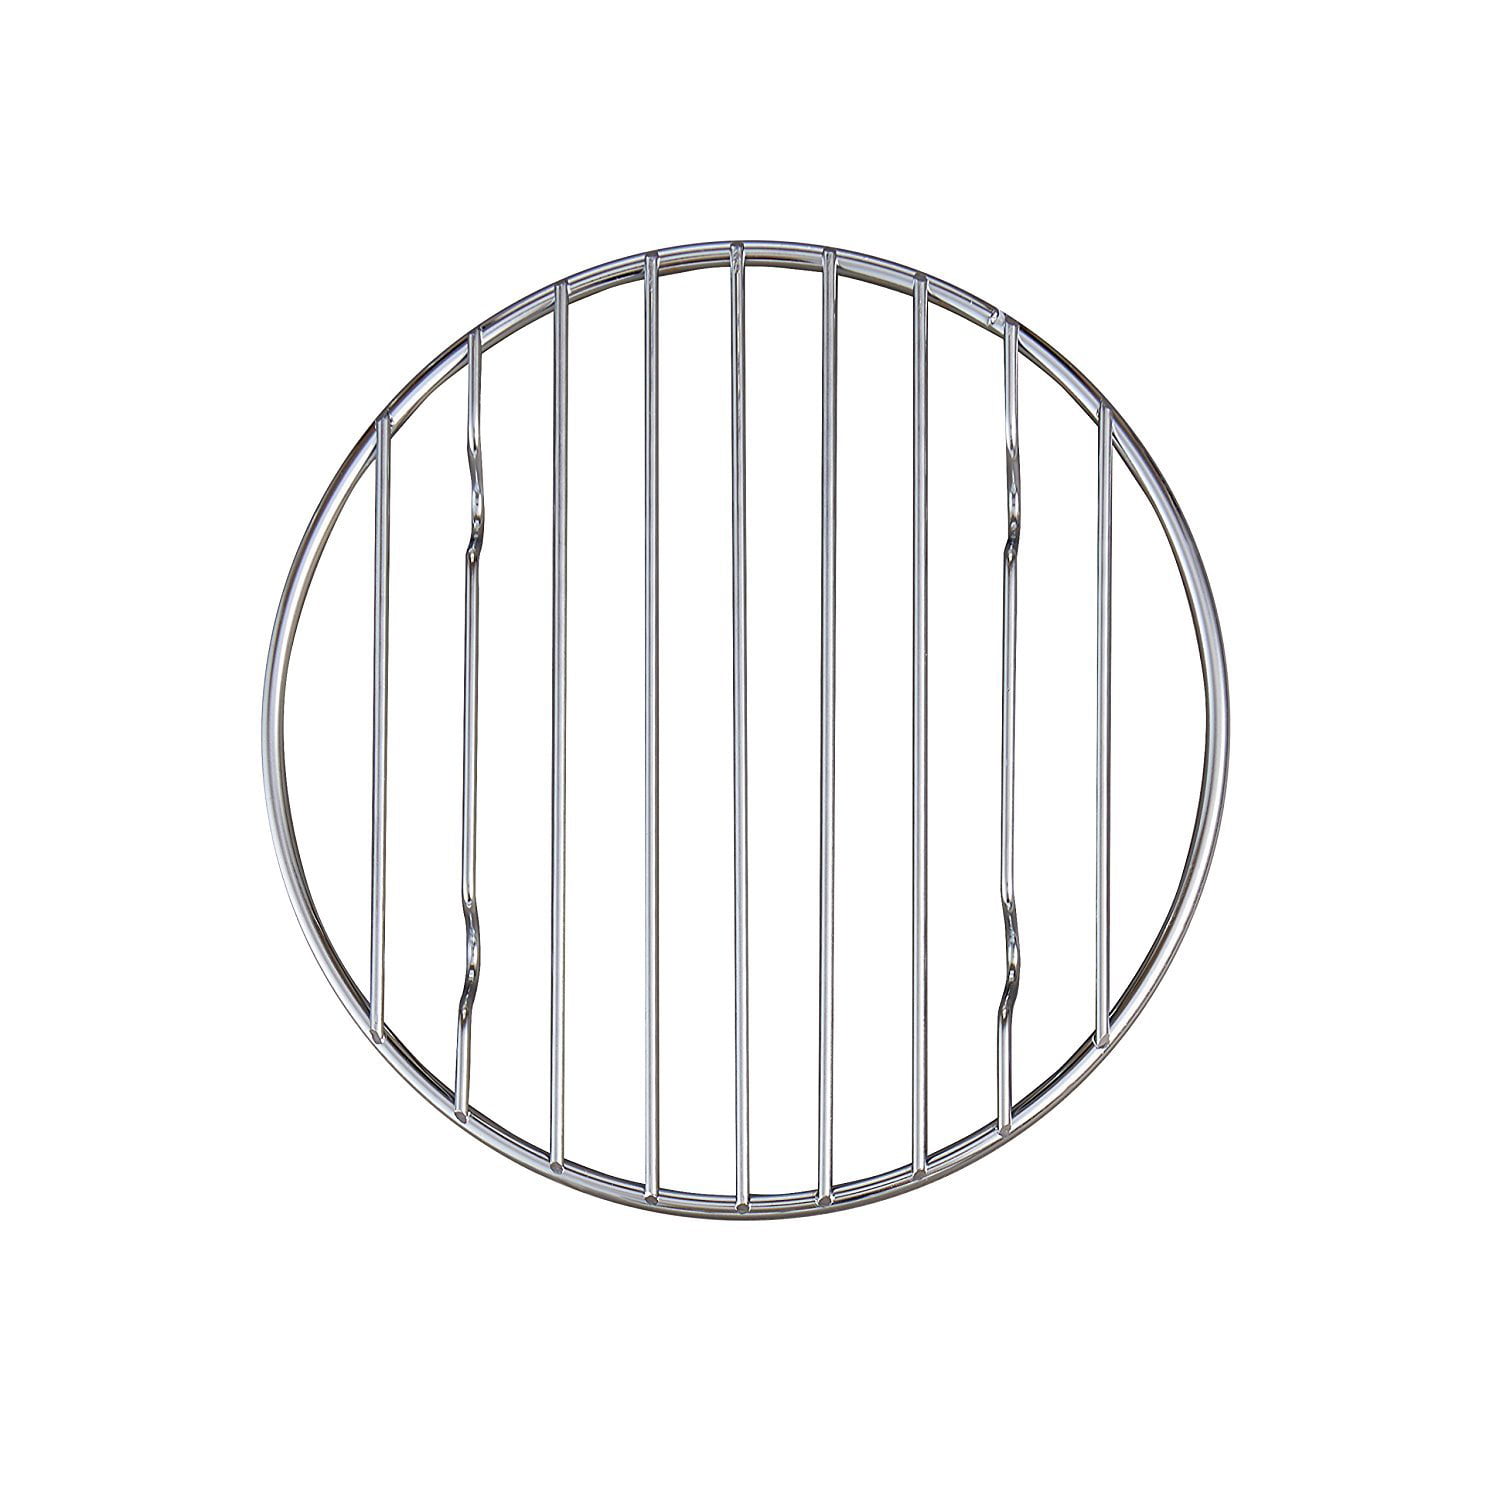 Anderson’s Baking 43193 Professional Baking and Cooling Rack Chrome-Plated Steel Wire 6-Inches Round Mrs